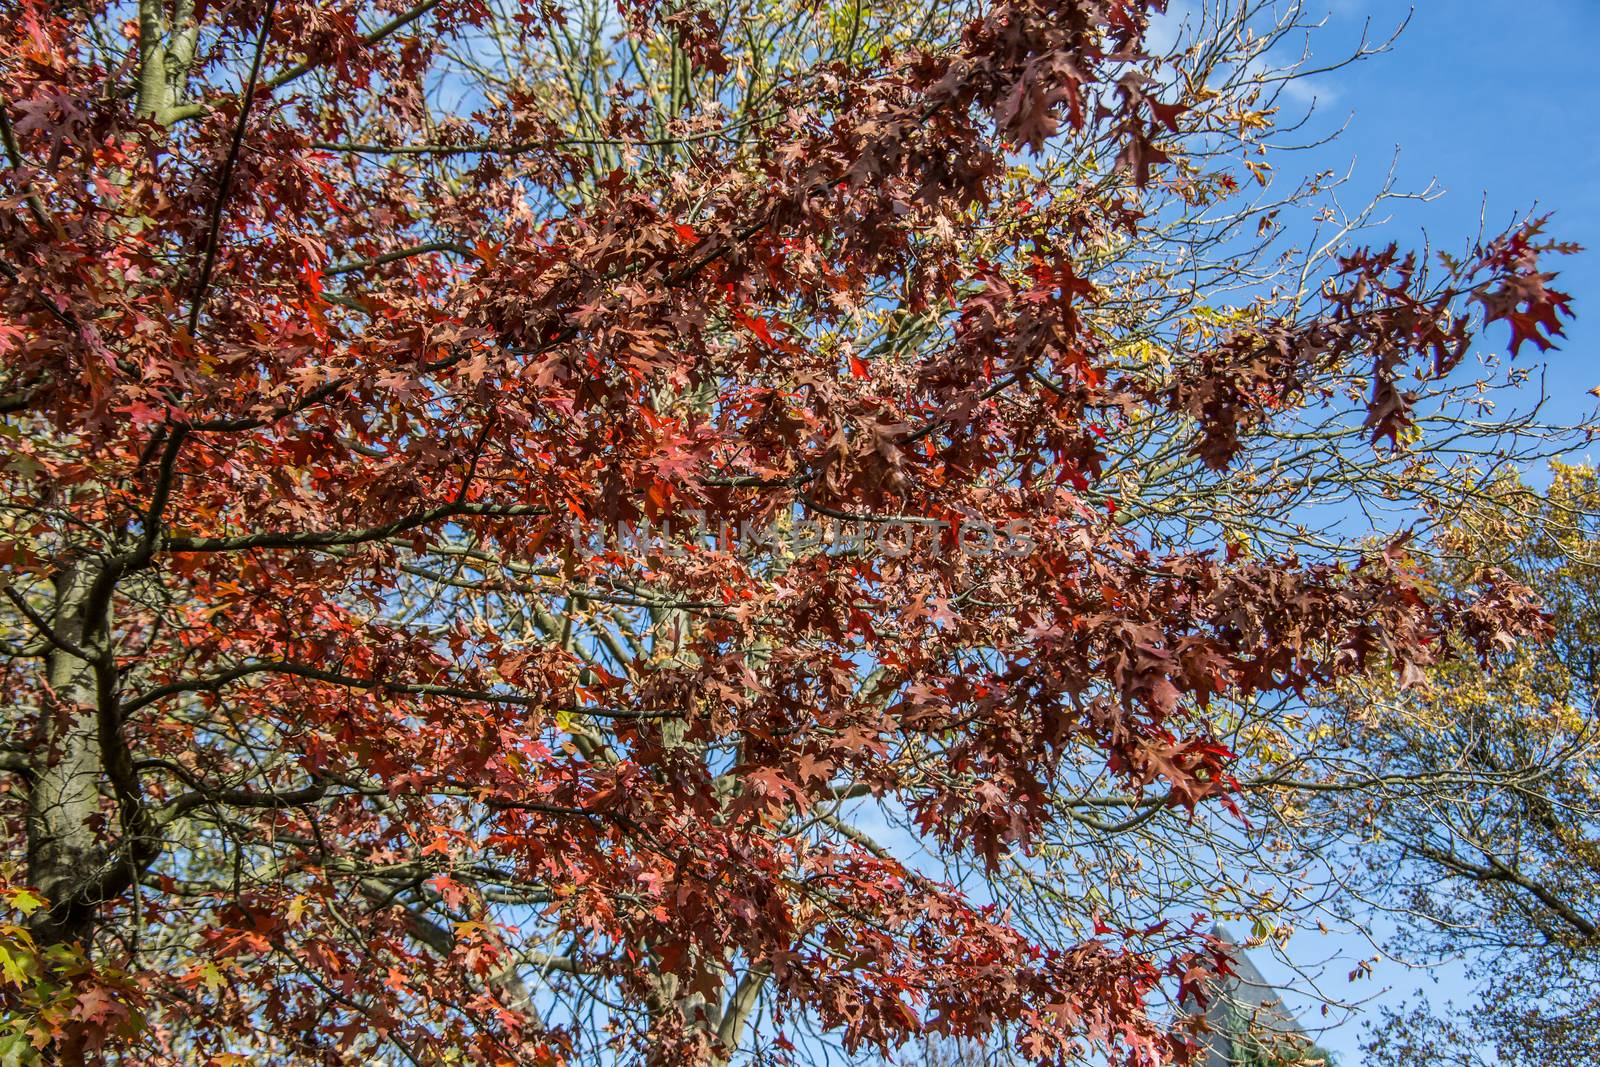 Norway maple and rowan tree tops with colorful leaves